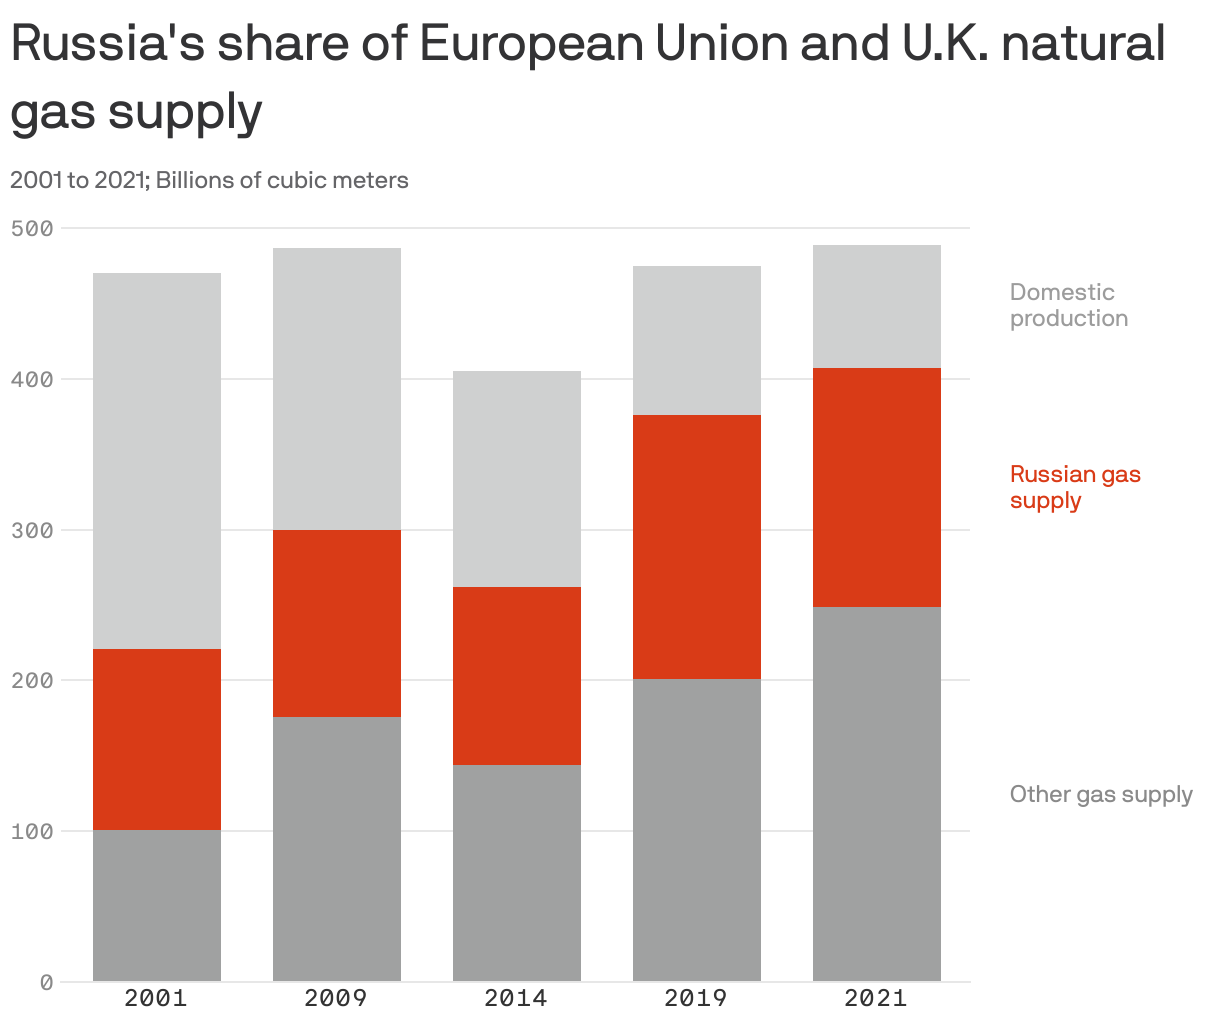 Russia's share of European Union and U.K. natural gas supply